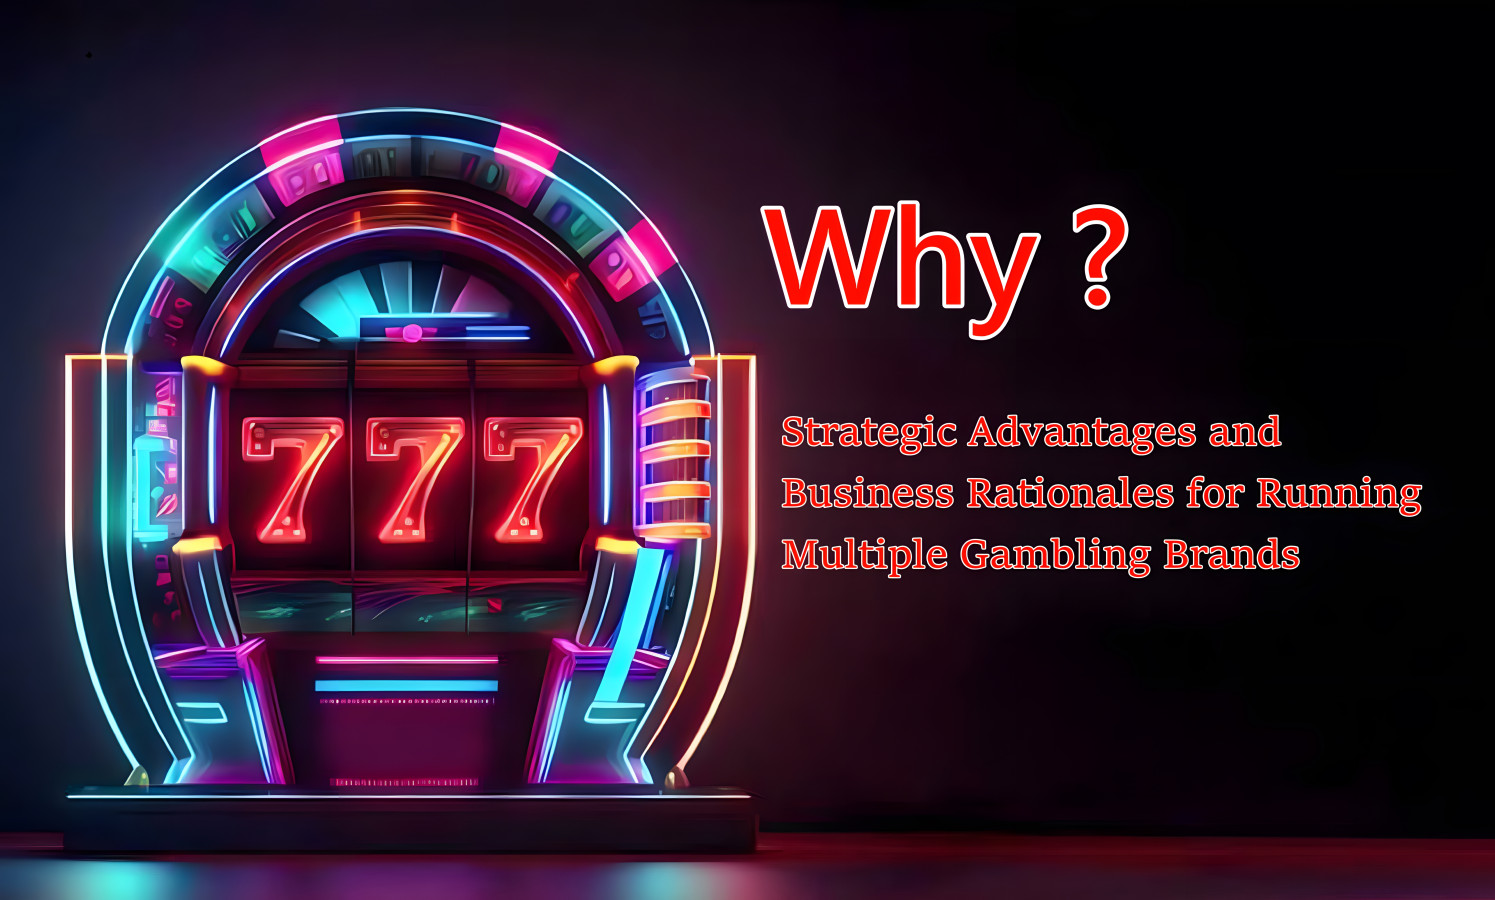 Strategic Advantages and Business Rationales for Running Multiple Gambling Brands